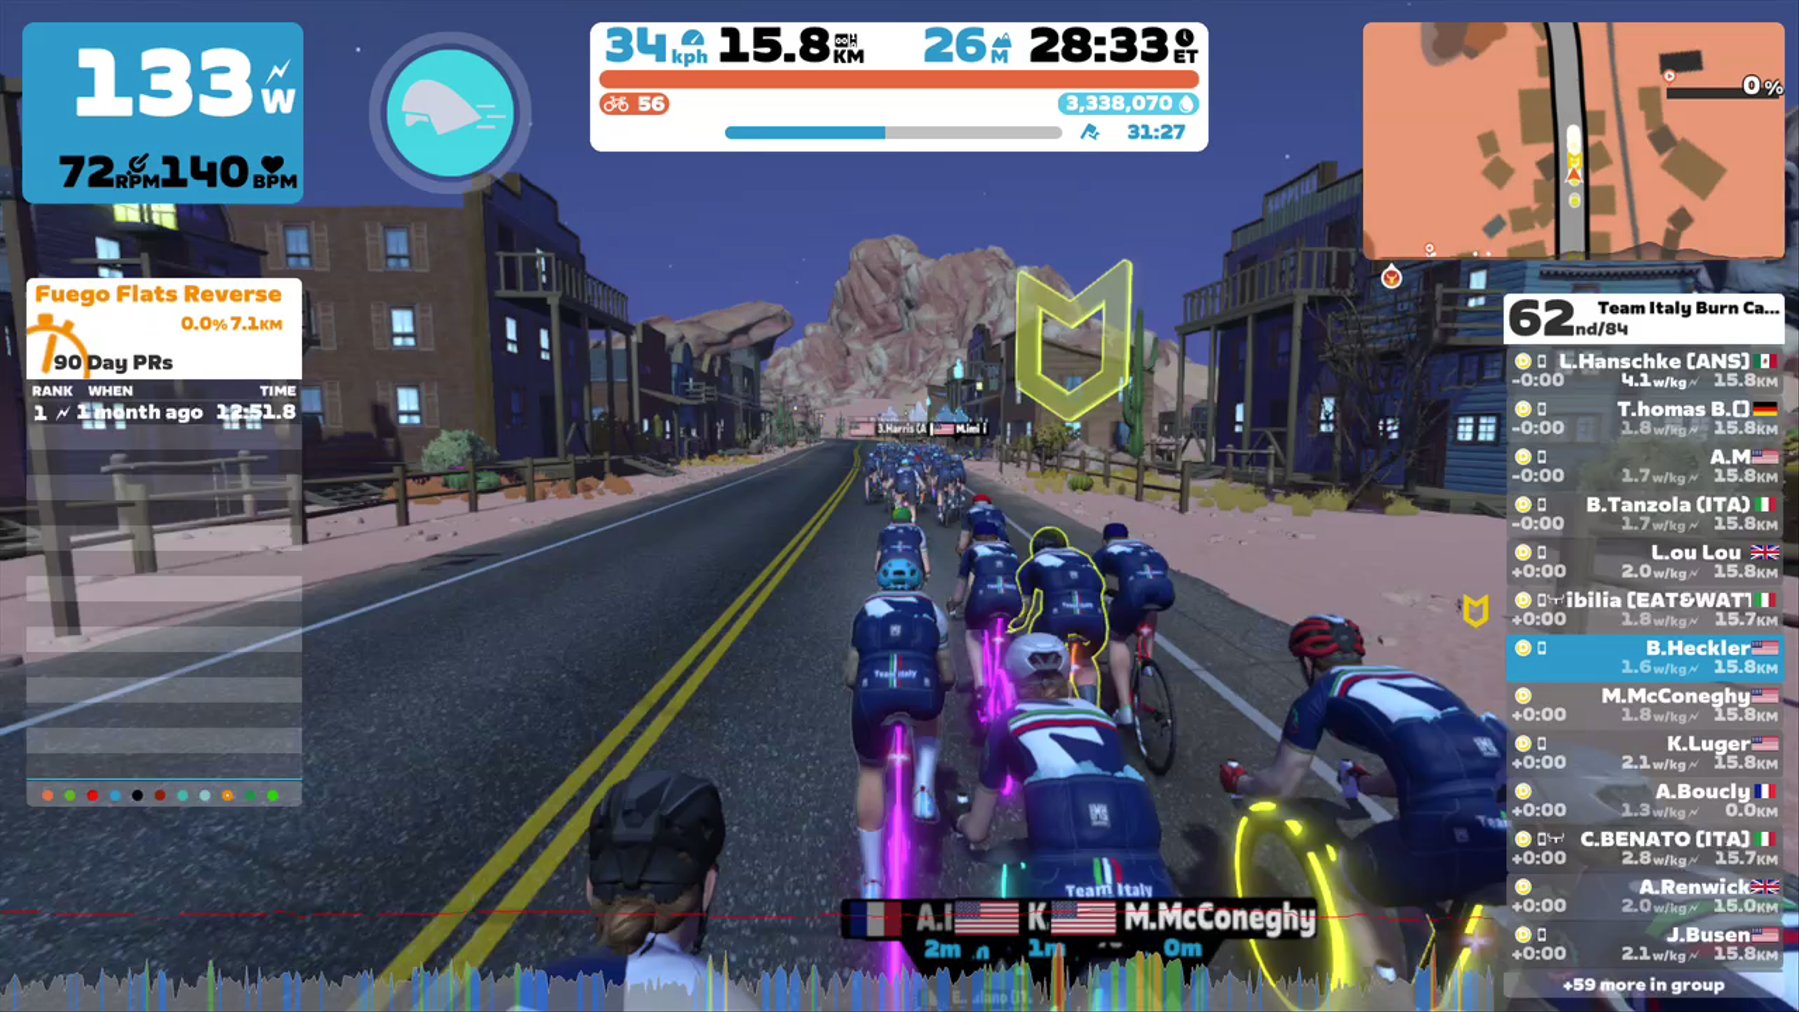 Zwift - Group Ride: Team Italy Burn Calories Together! (D) on Tempus Fugit in Watopia